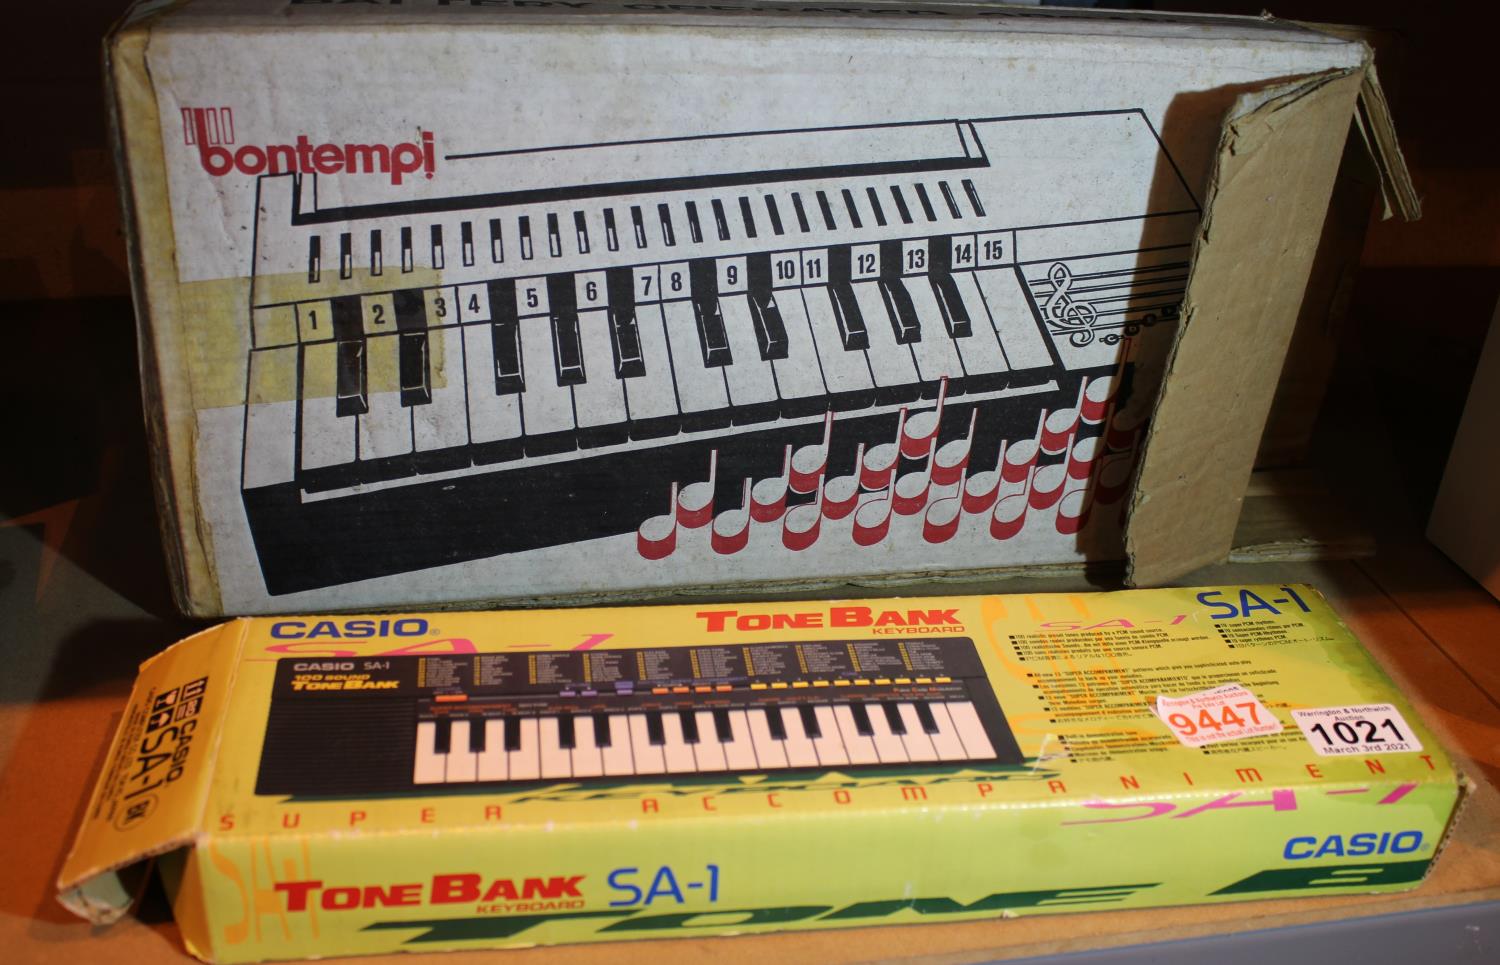 Bontemp battery organ and Casio tone bank keyboard. P&P Group 2 (£18+VAT for the first lot and £3+